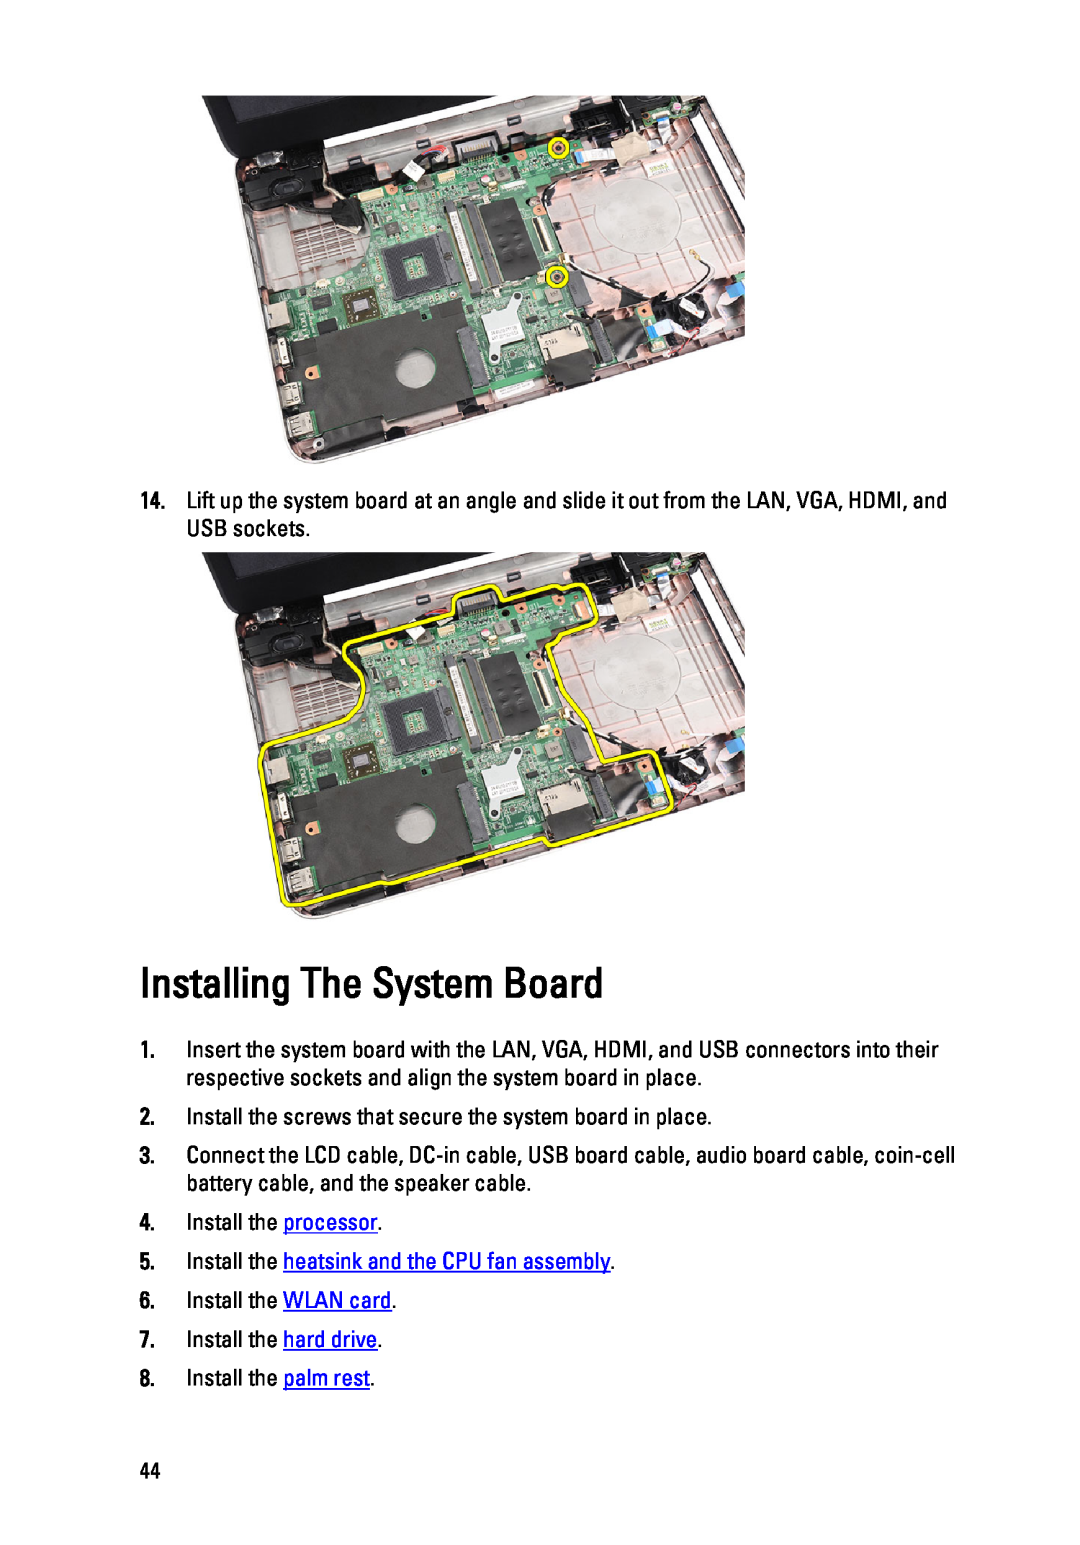 Dell P22G owner manual Installing The System Board, Install the heatsink and the CPU fan assembly 